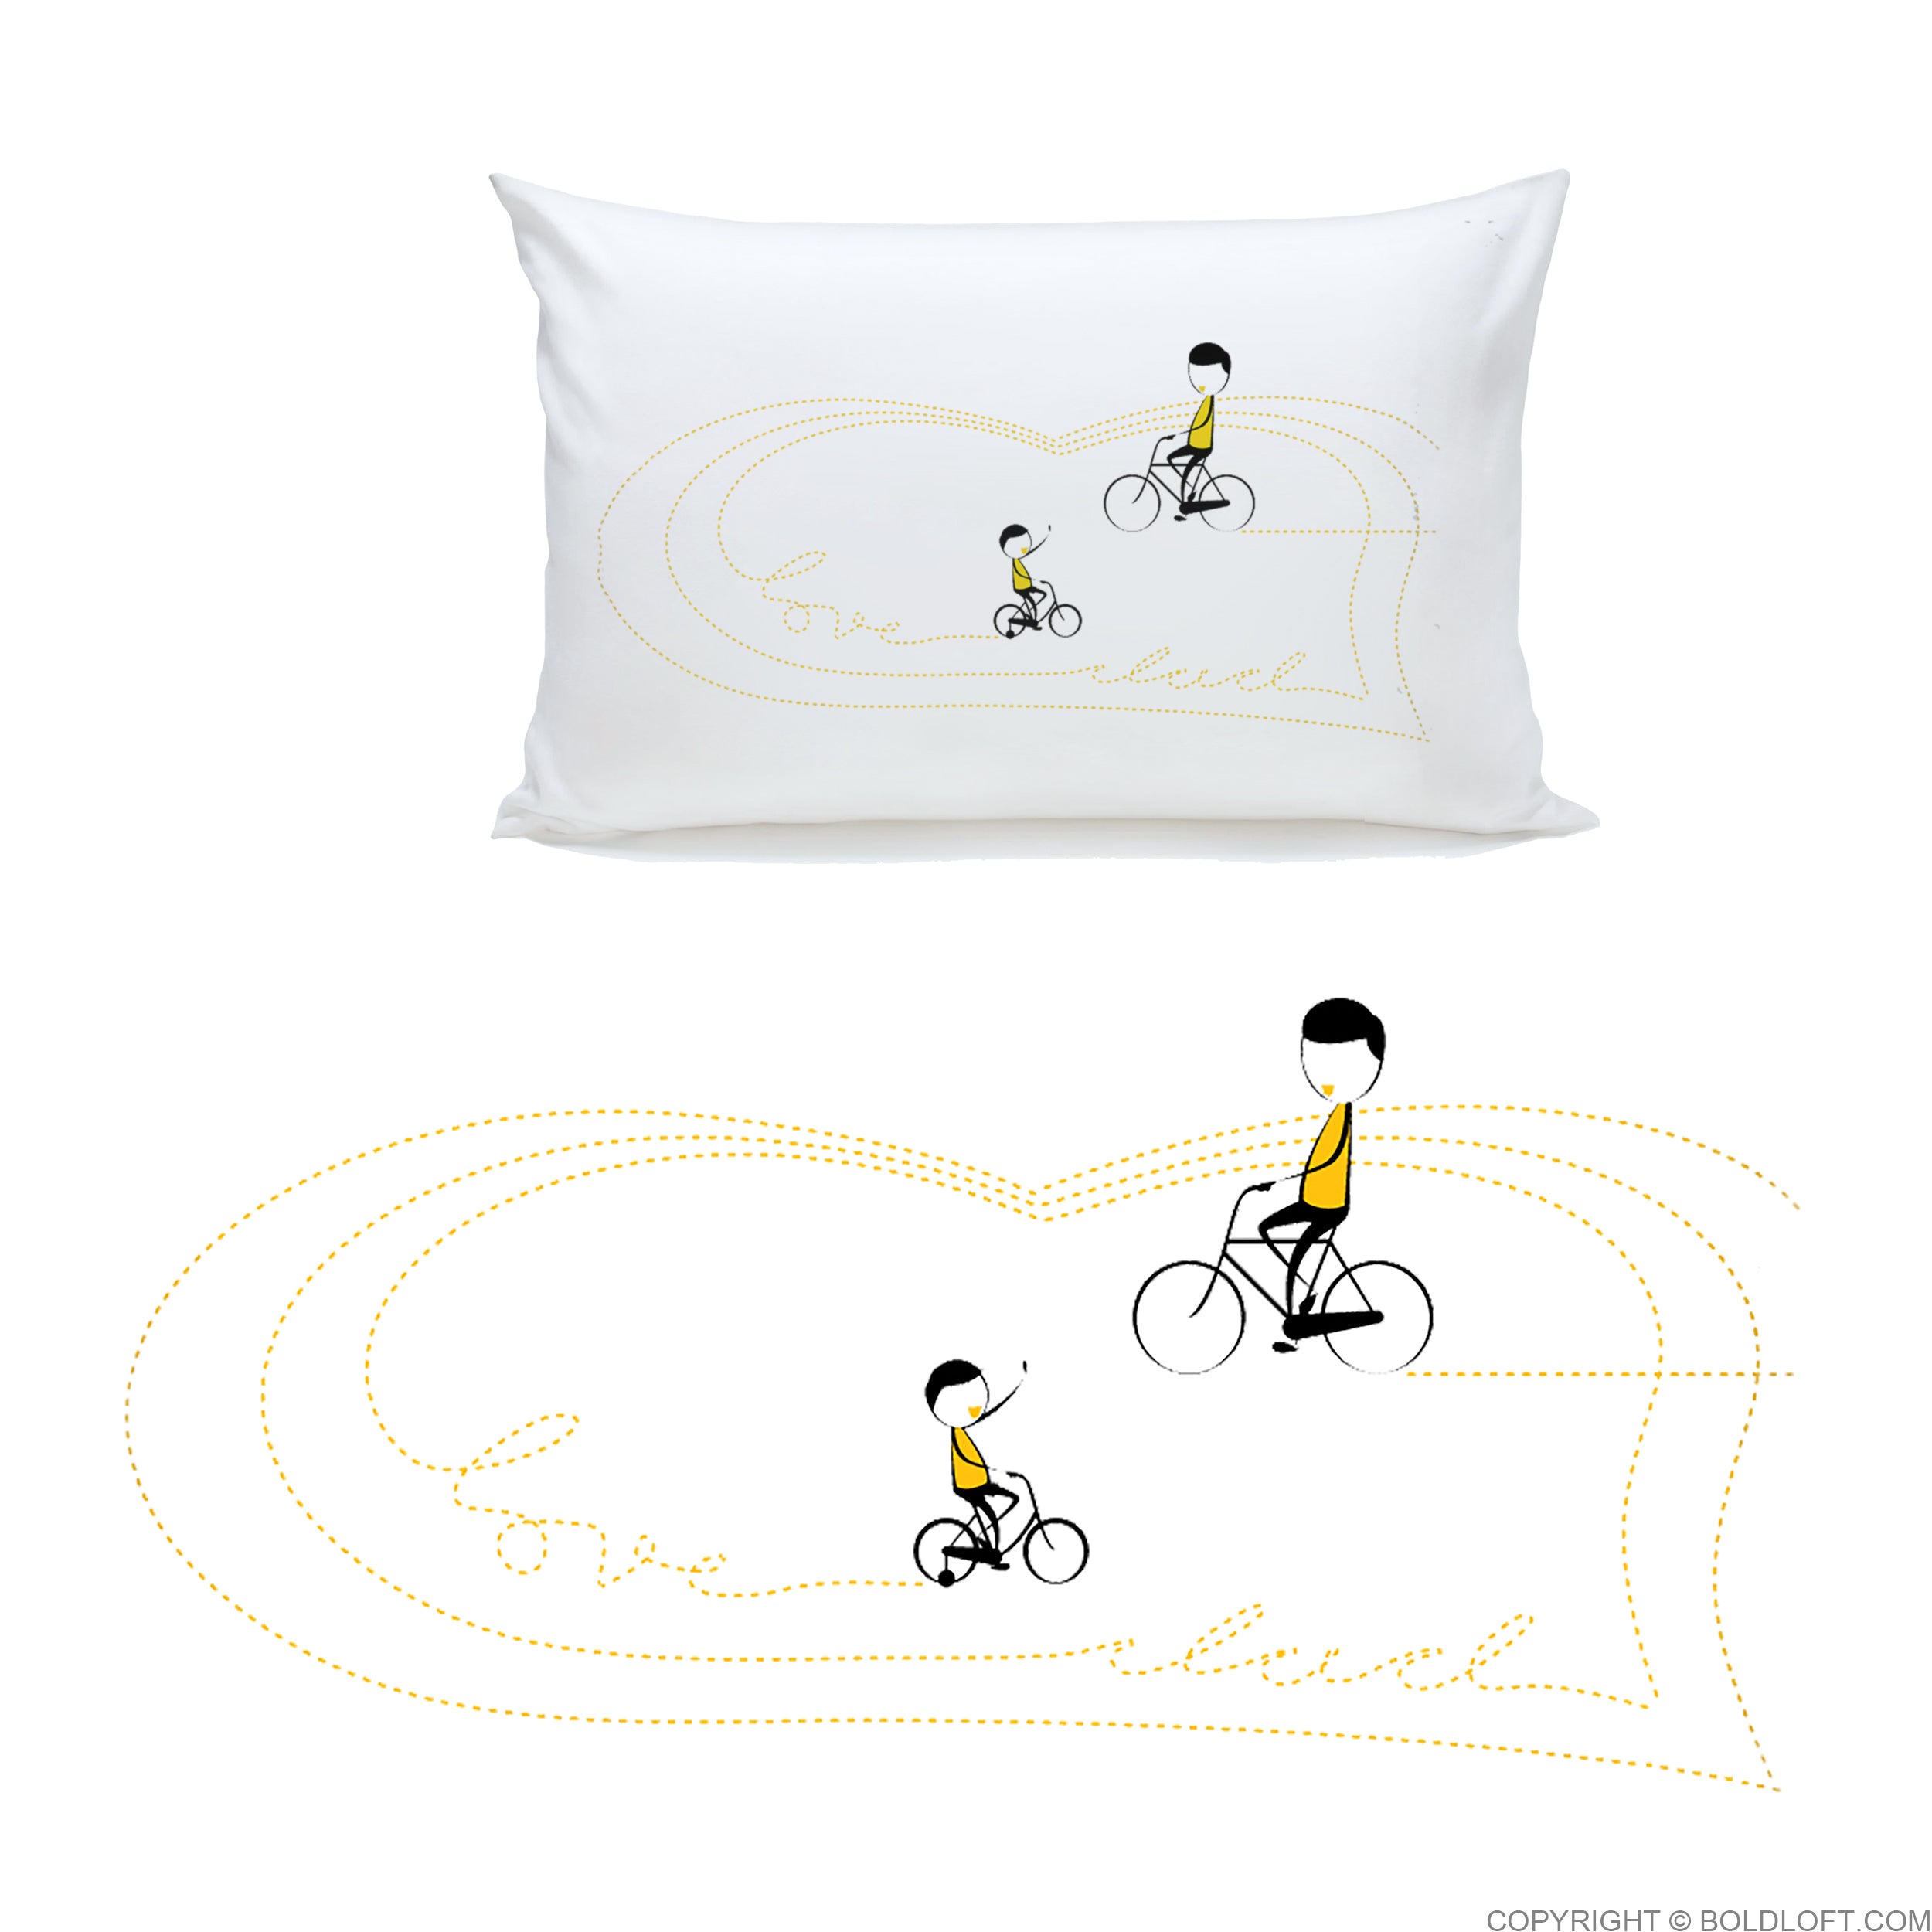 BoldLoft I Heart You Dad Pillow Cover. Pillowcase with an illustration of a father and his kid riding bikes together. Great daddy pillowcase gift for dad and papa.